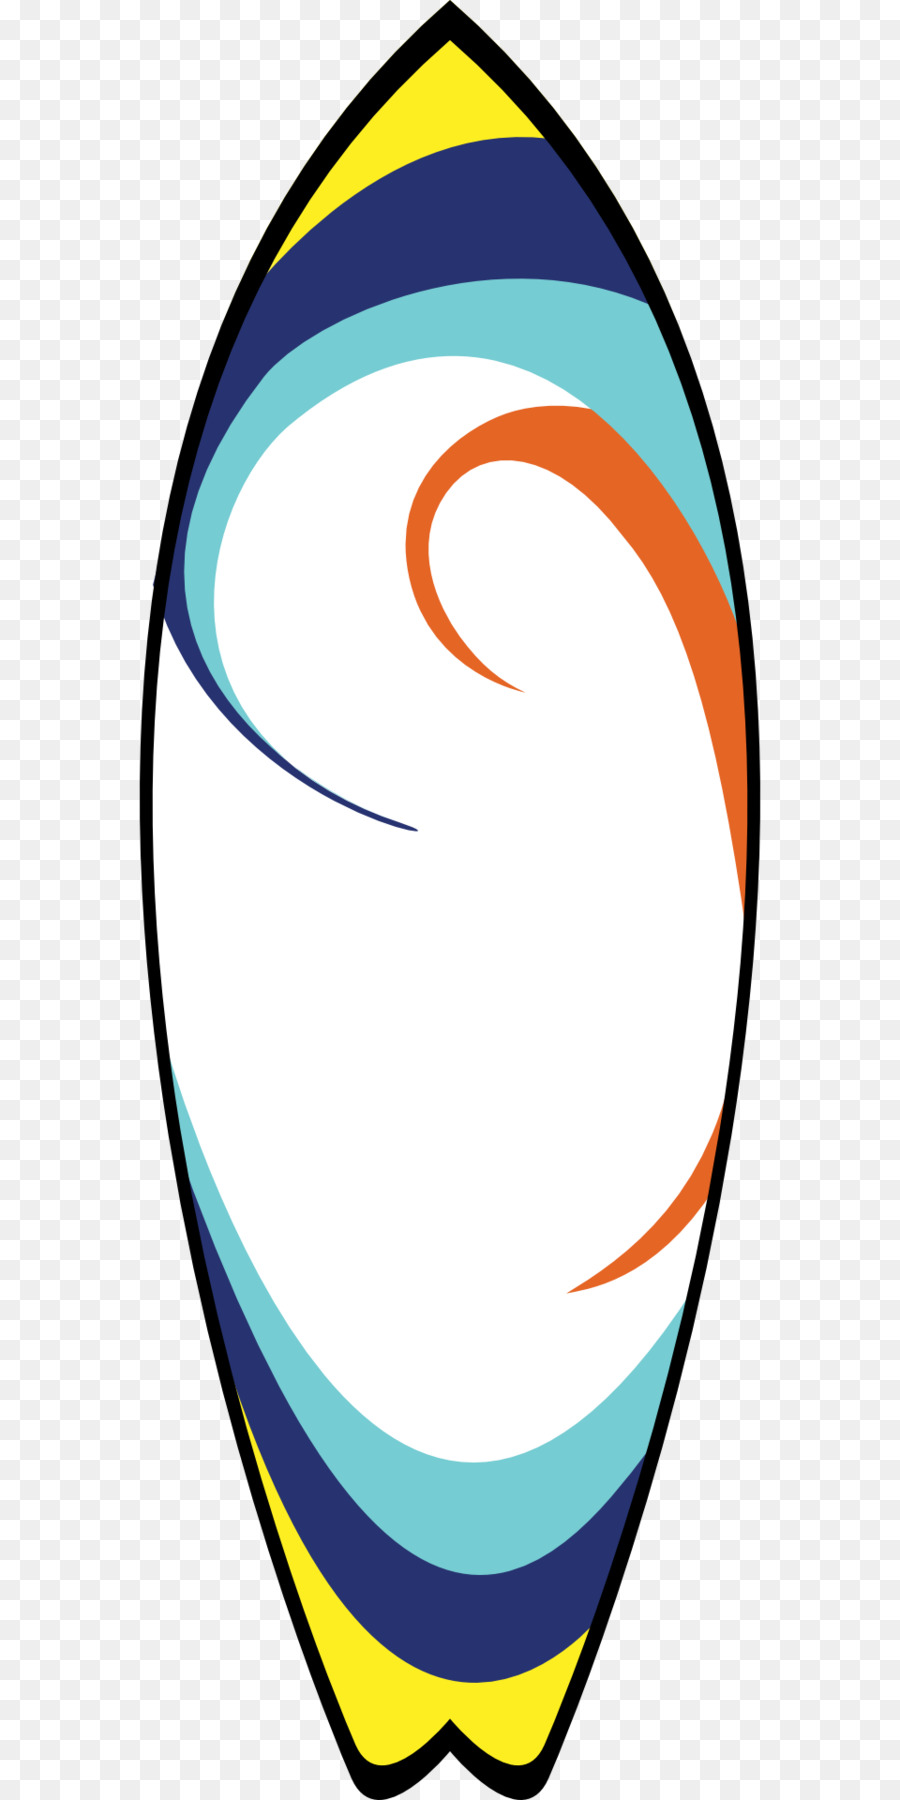 Surfboard Surfing Clip art - surfing vector png download - 960*1920 - Free Transparent Surfboard png Download.